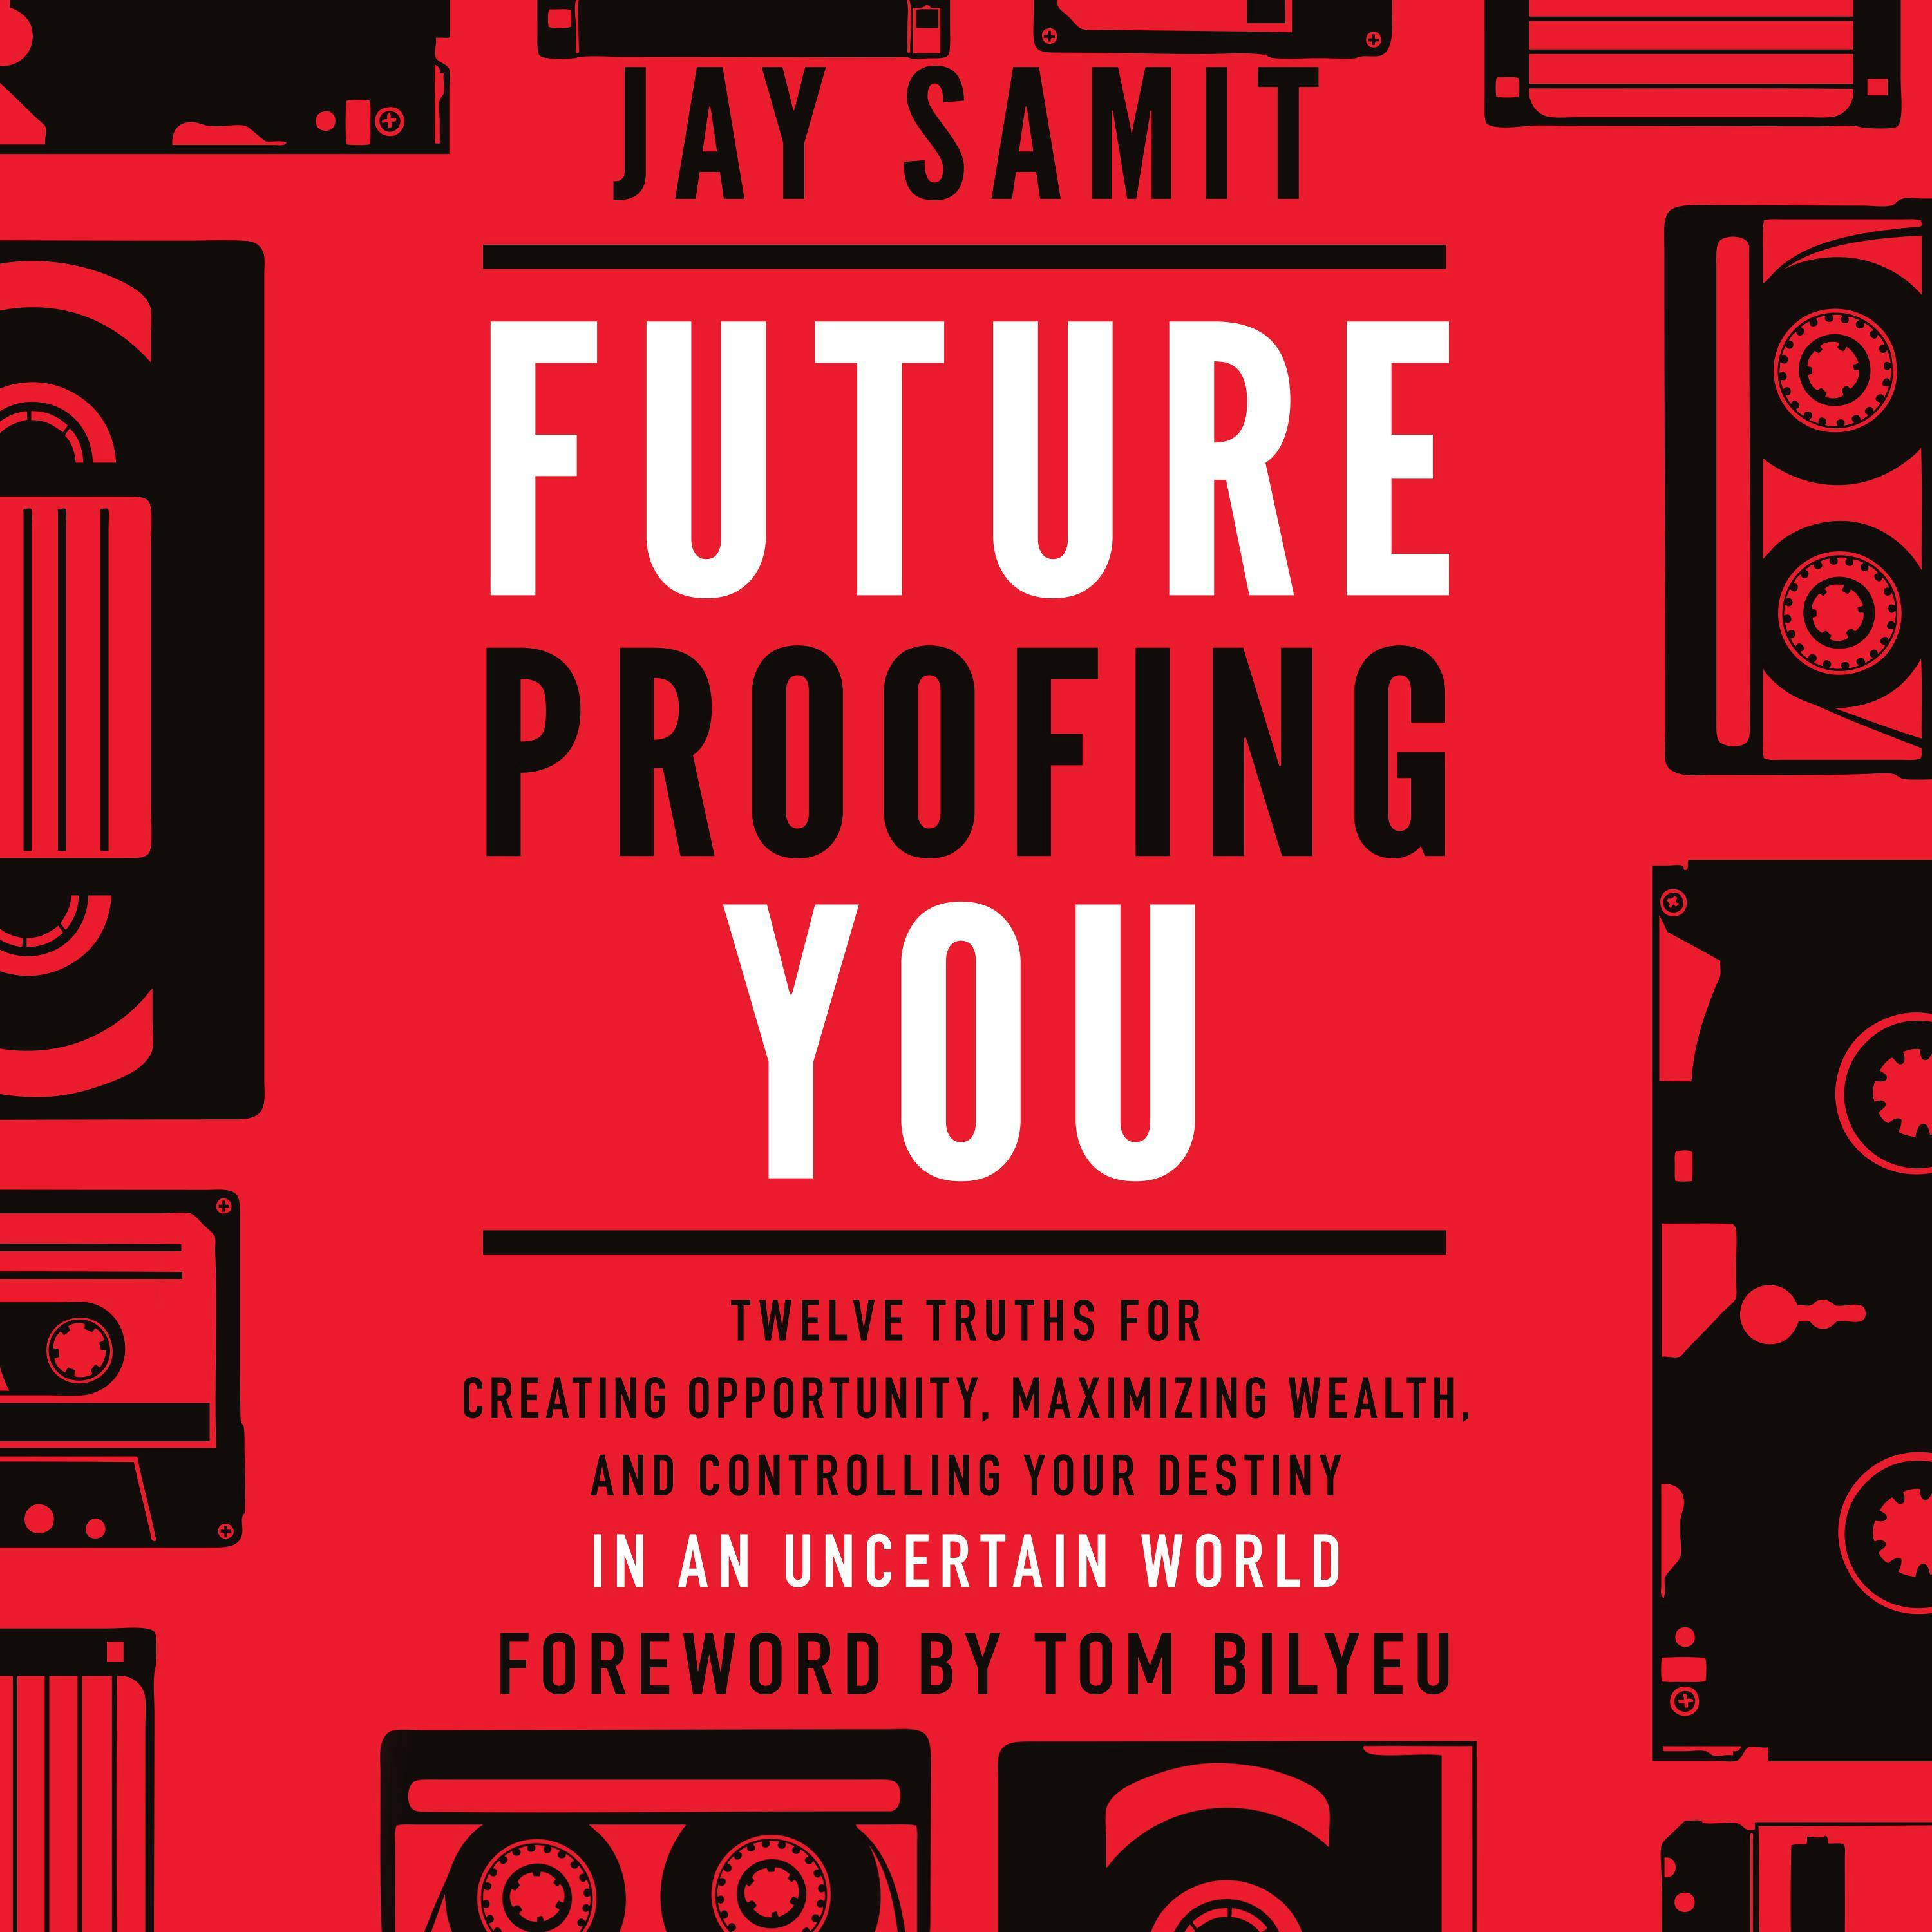 Future Proofing You: Twelve Truths for Creating Opportunity, Maximizing Wealth, and Controlling your Destiny in an Uncertain World - Jay Samit